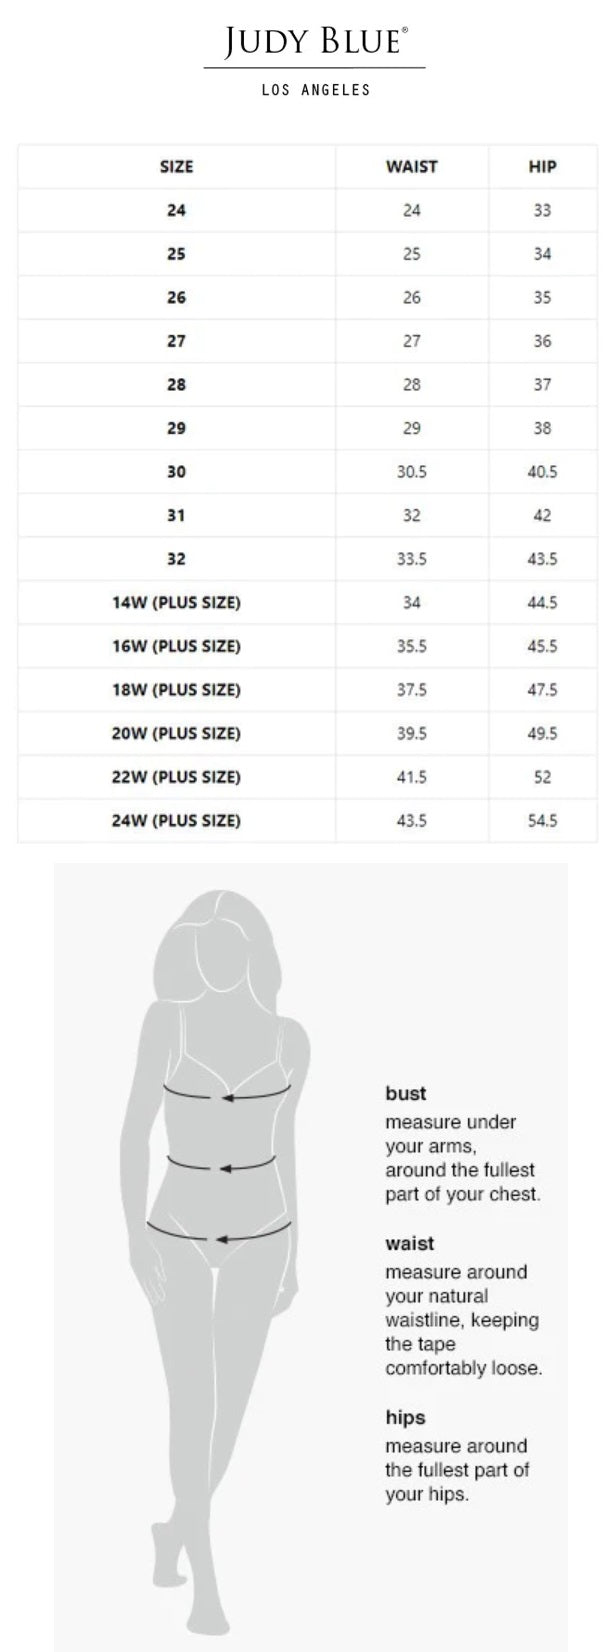 Judy Blue Jeans sizing chart